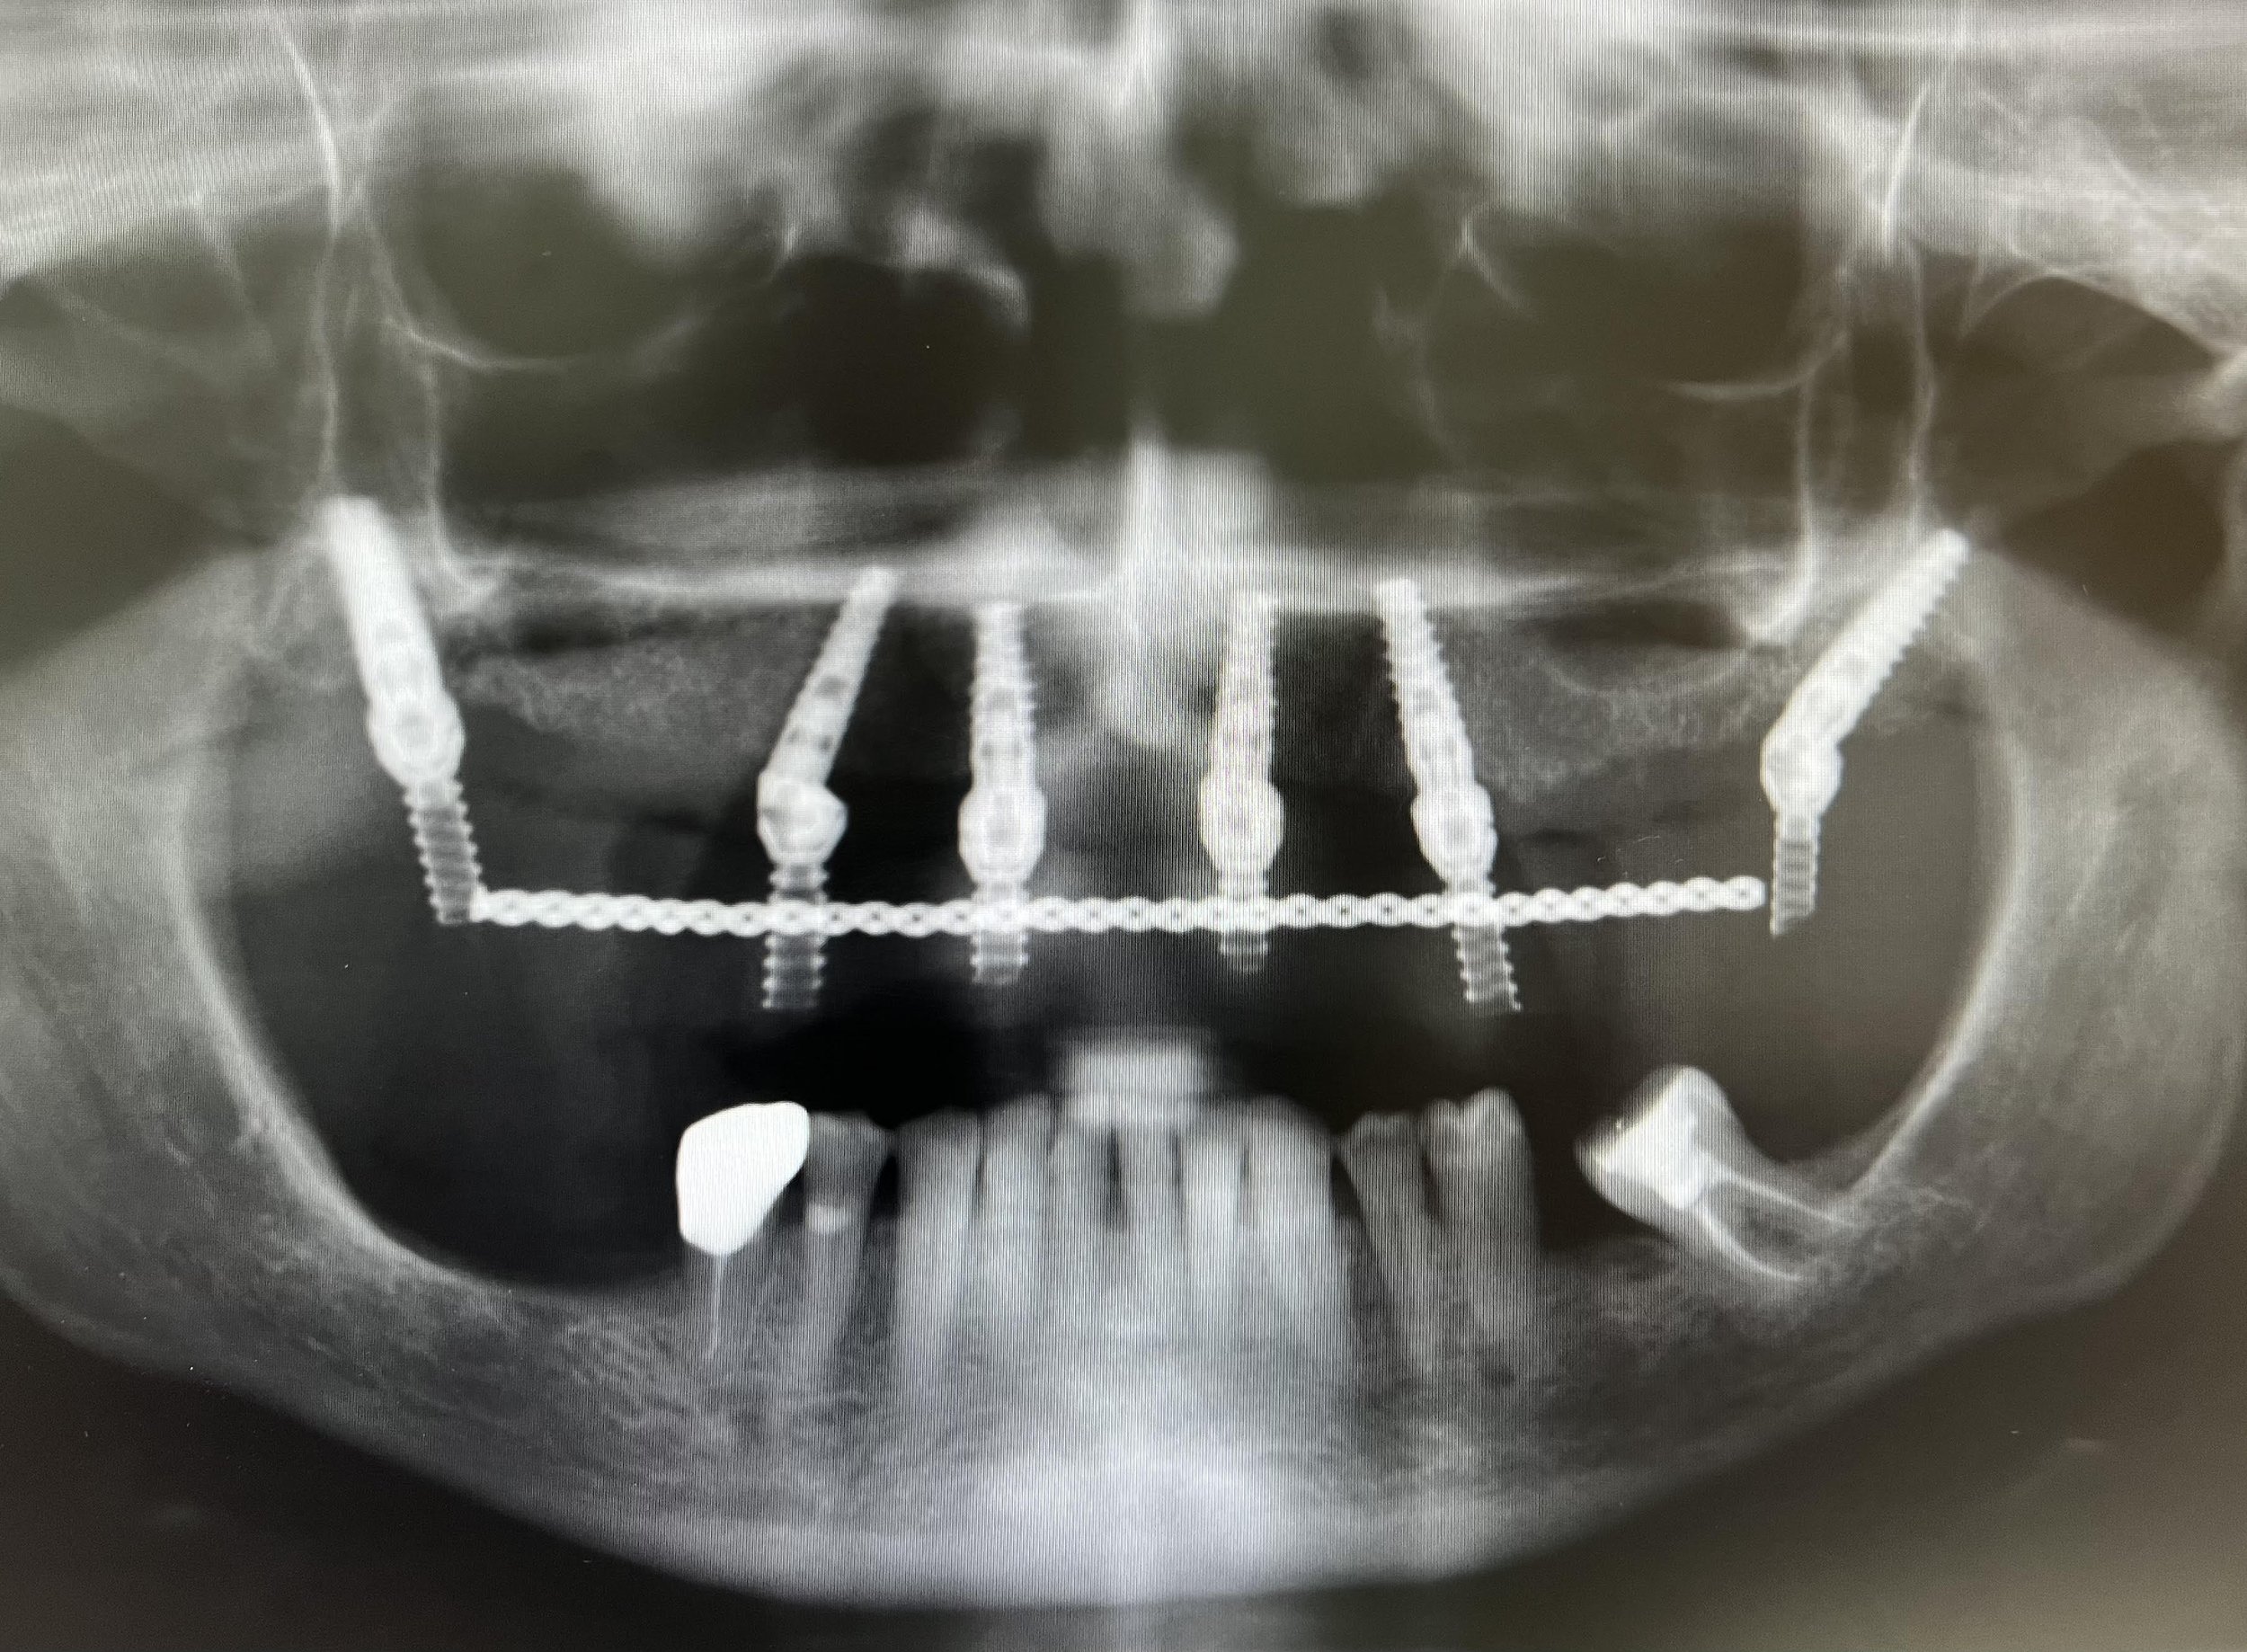 HILL ORAL SURGERY